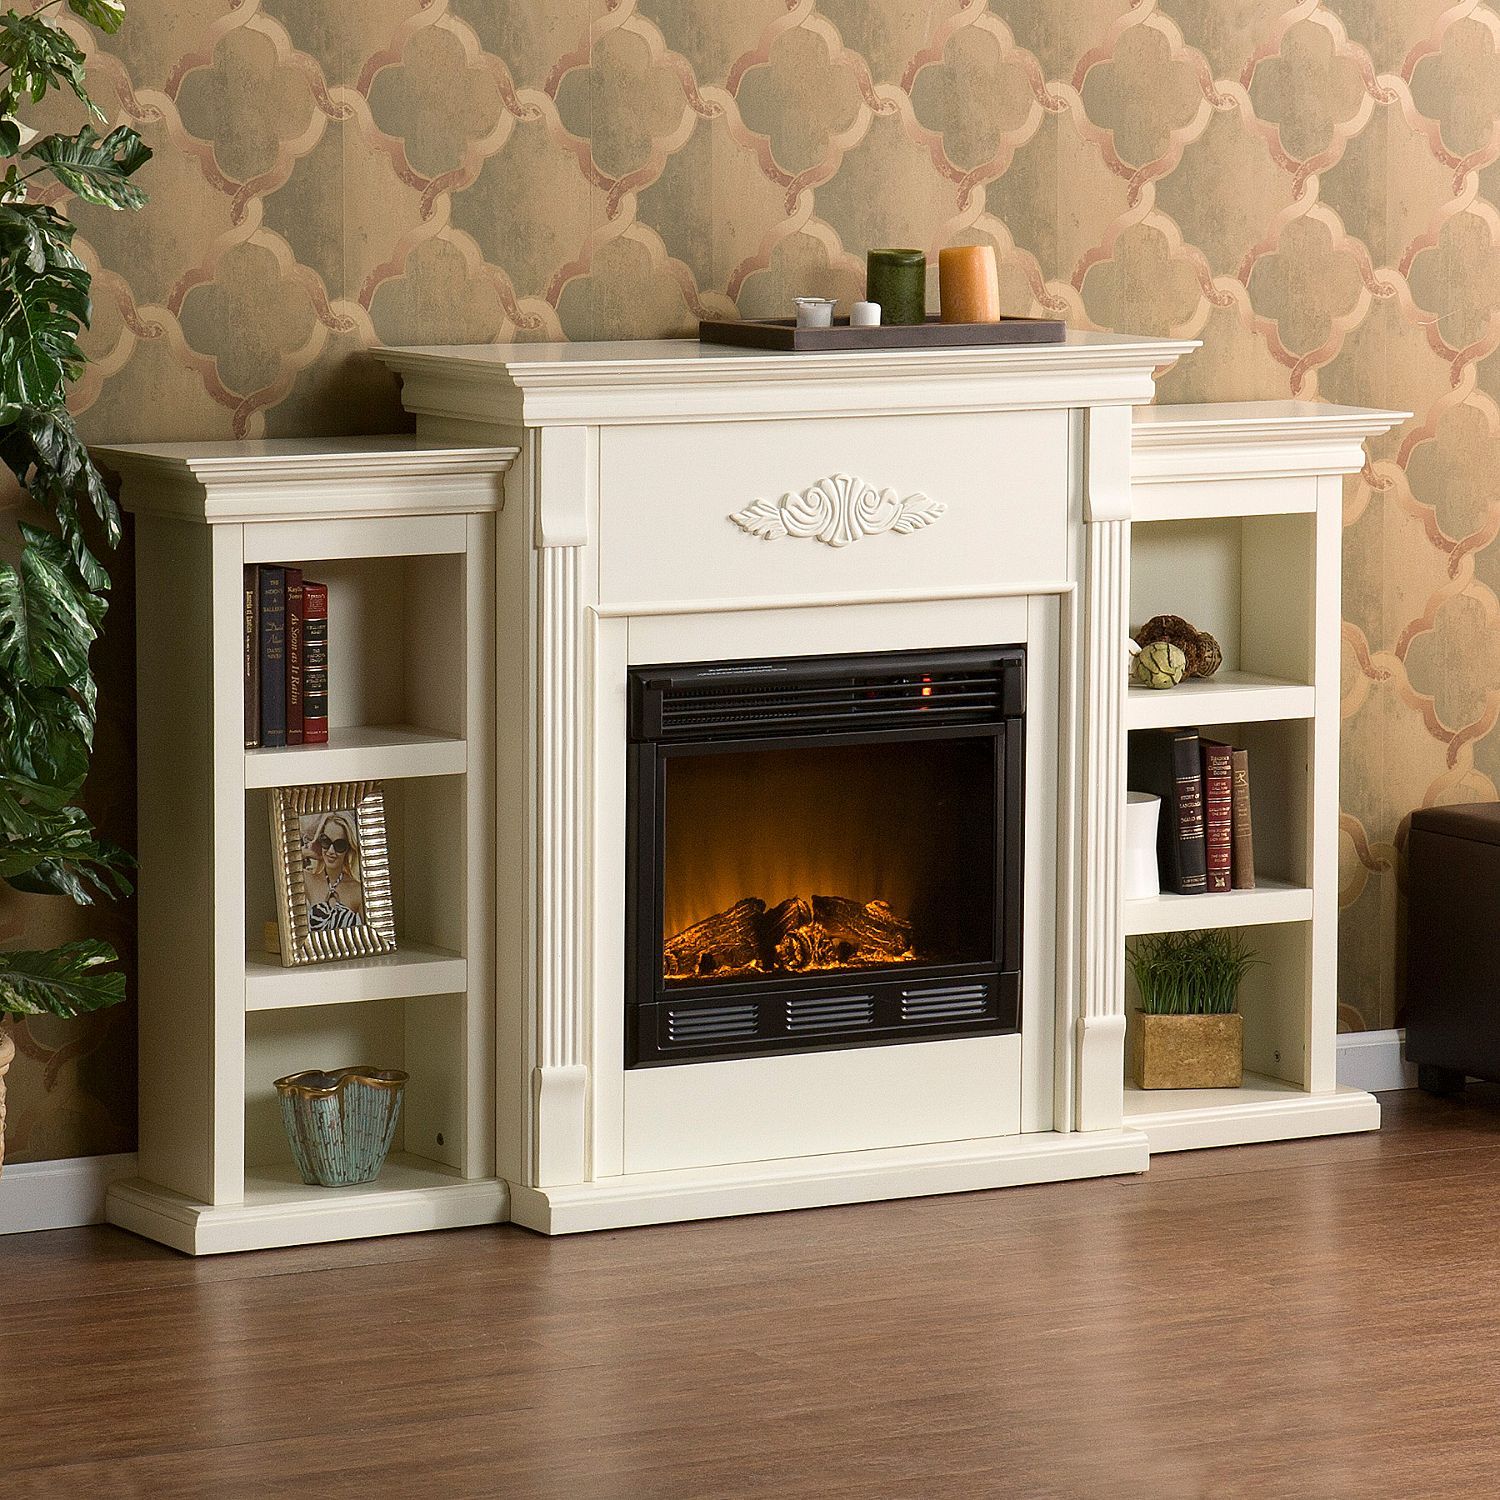 Small Fireplace Heater Elegant Emerson Electric Fireplace Ivory Sam S Club